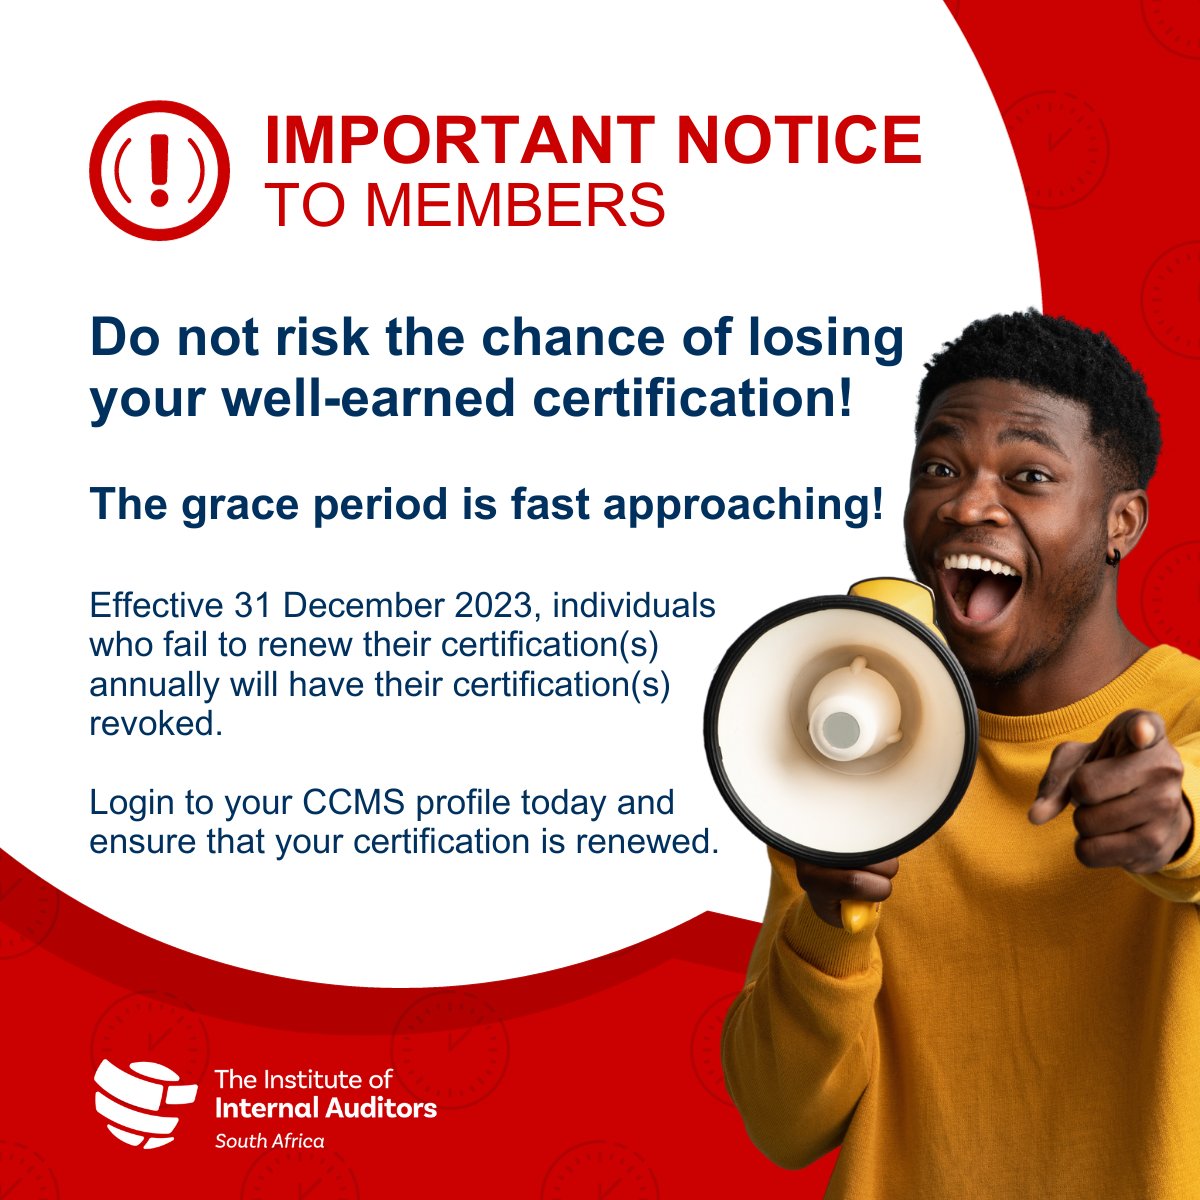 The 31st December 2023 is the FINAL deadline for renewal, and there will be NO extensions afte which non-renewed certifications face revocation. 

⚠️ Act now! Log in to your CCMS profile today to secure your professional standing.

#CertificationRenewal #ProfessionalDevelopment